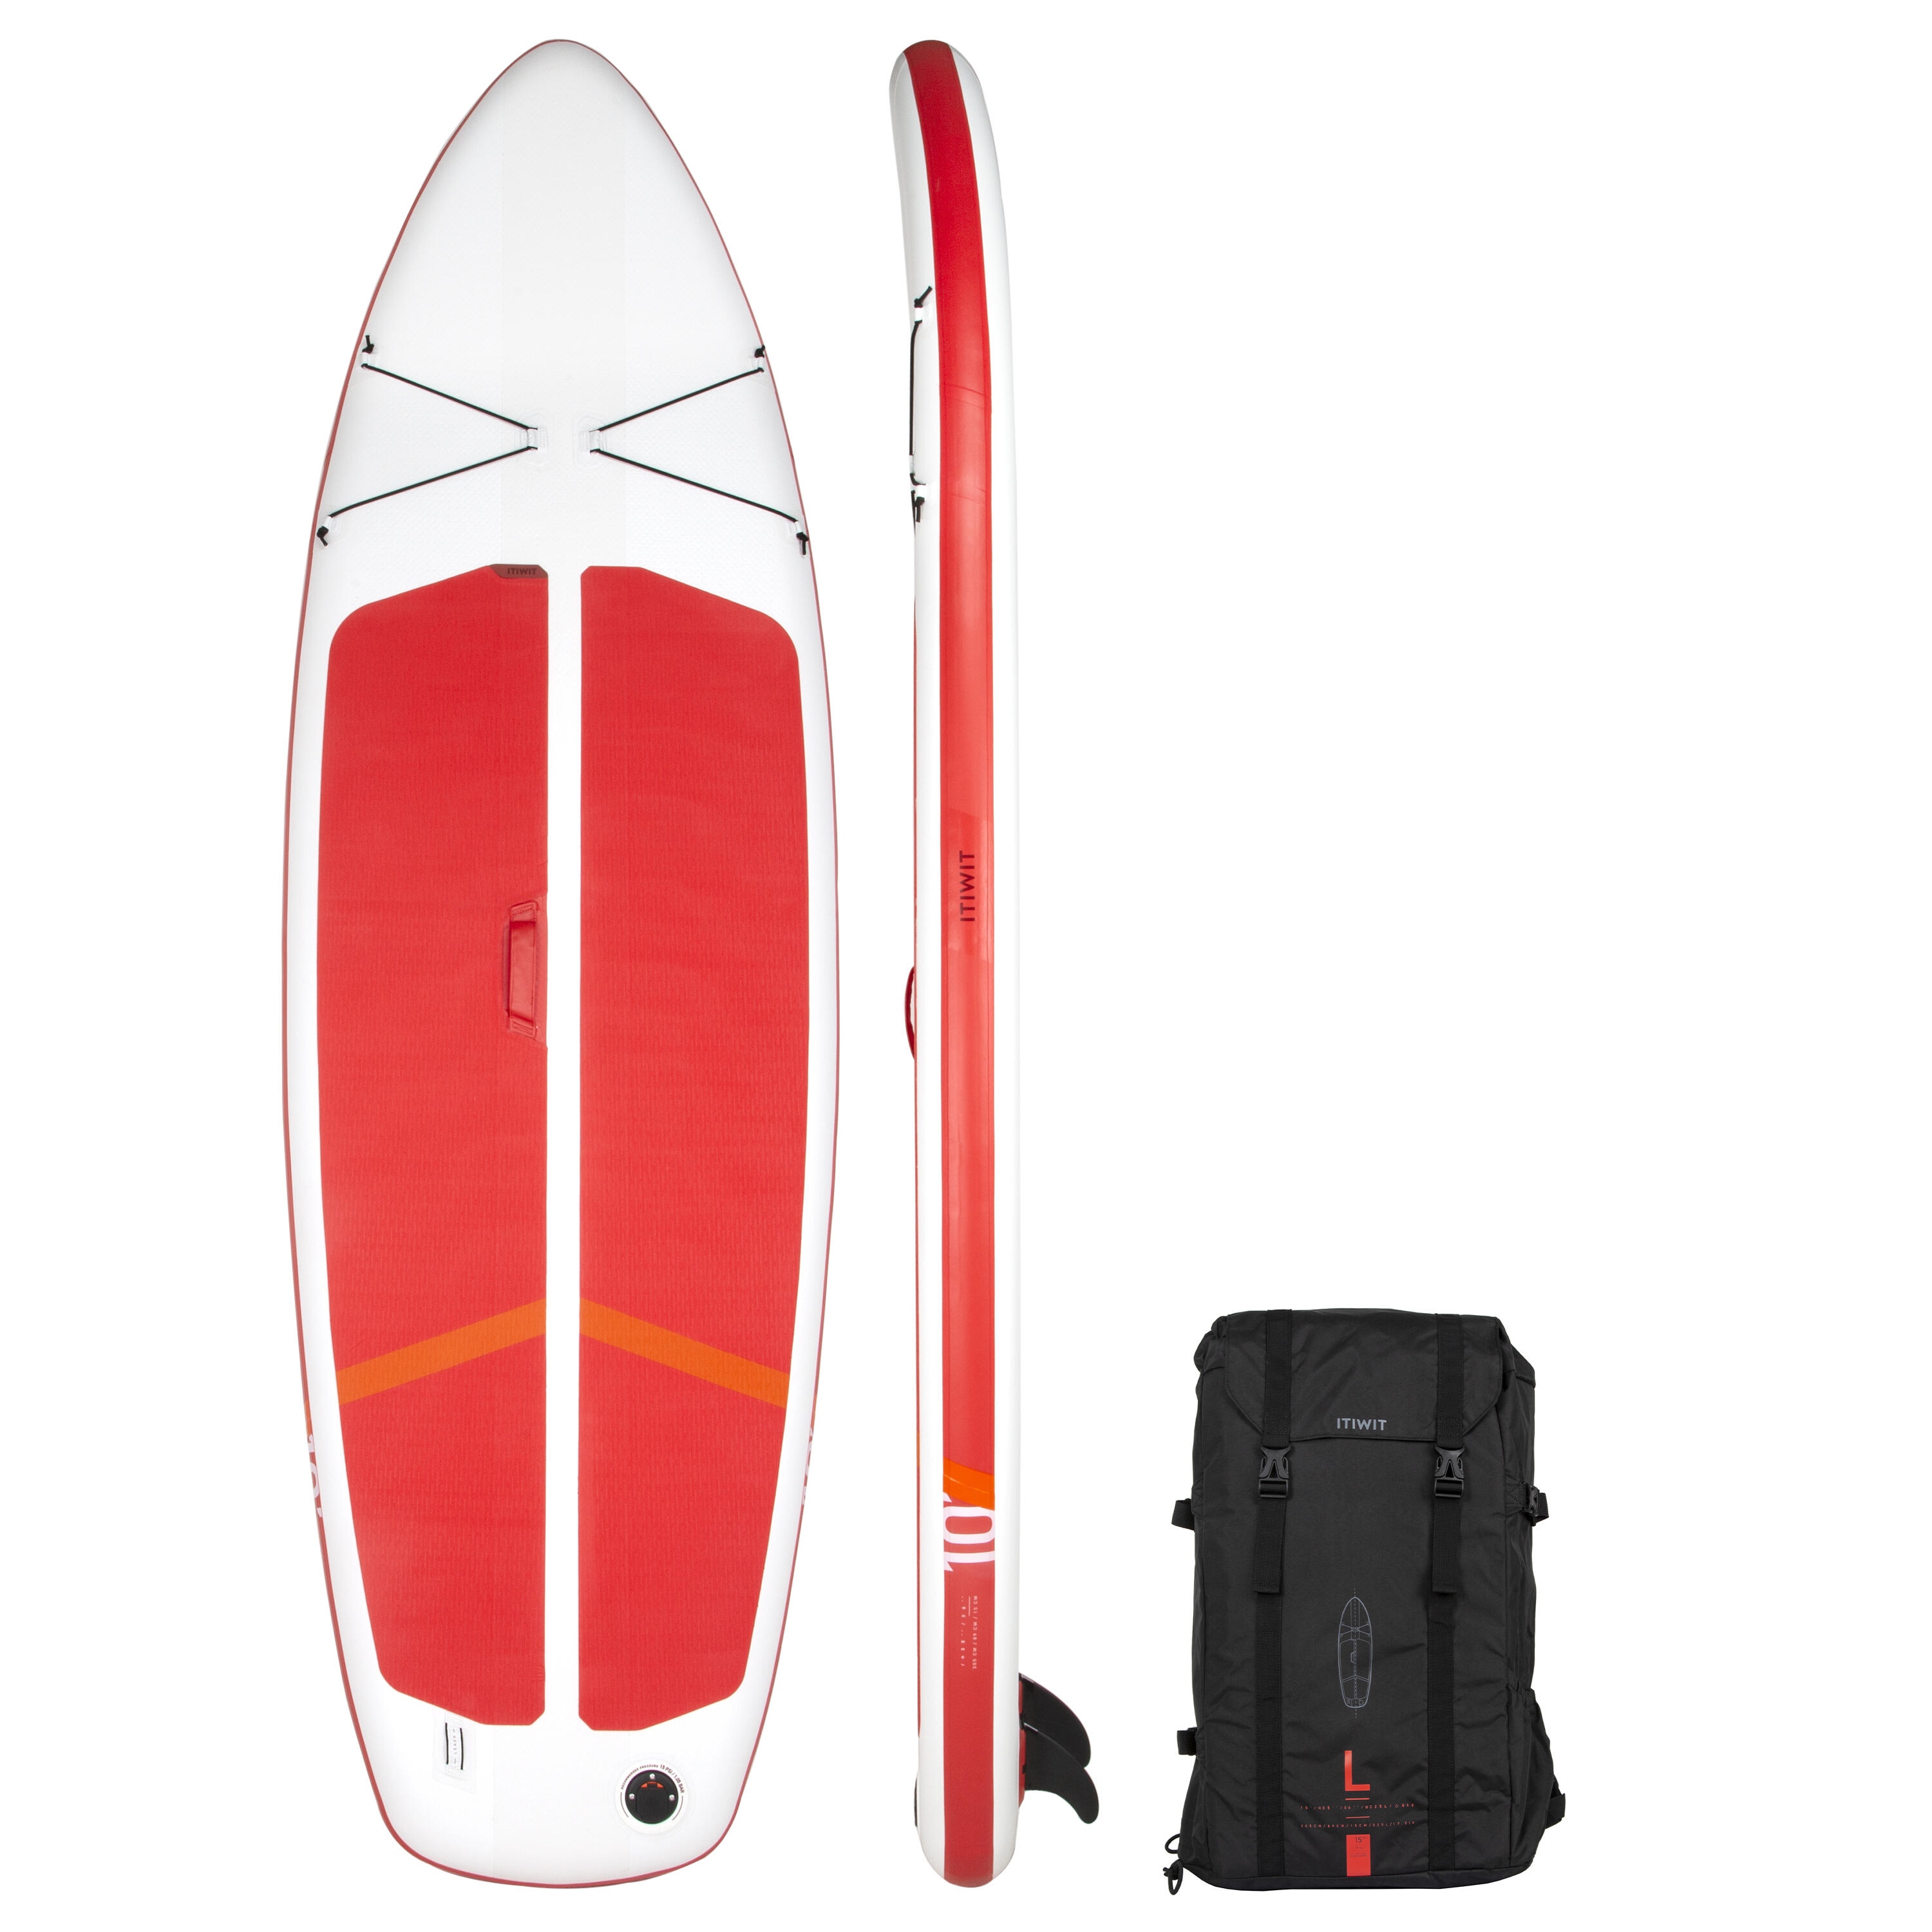 ITIWIT Ultra-compact and stable 10-foot (130 kg max.) SUP - White and Red